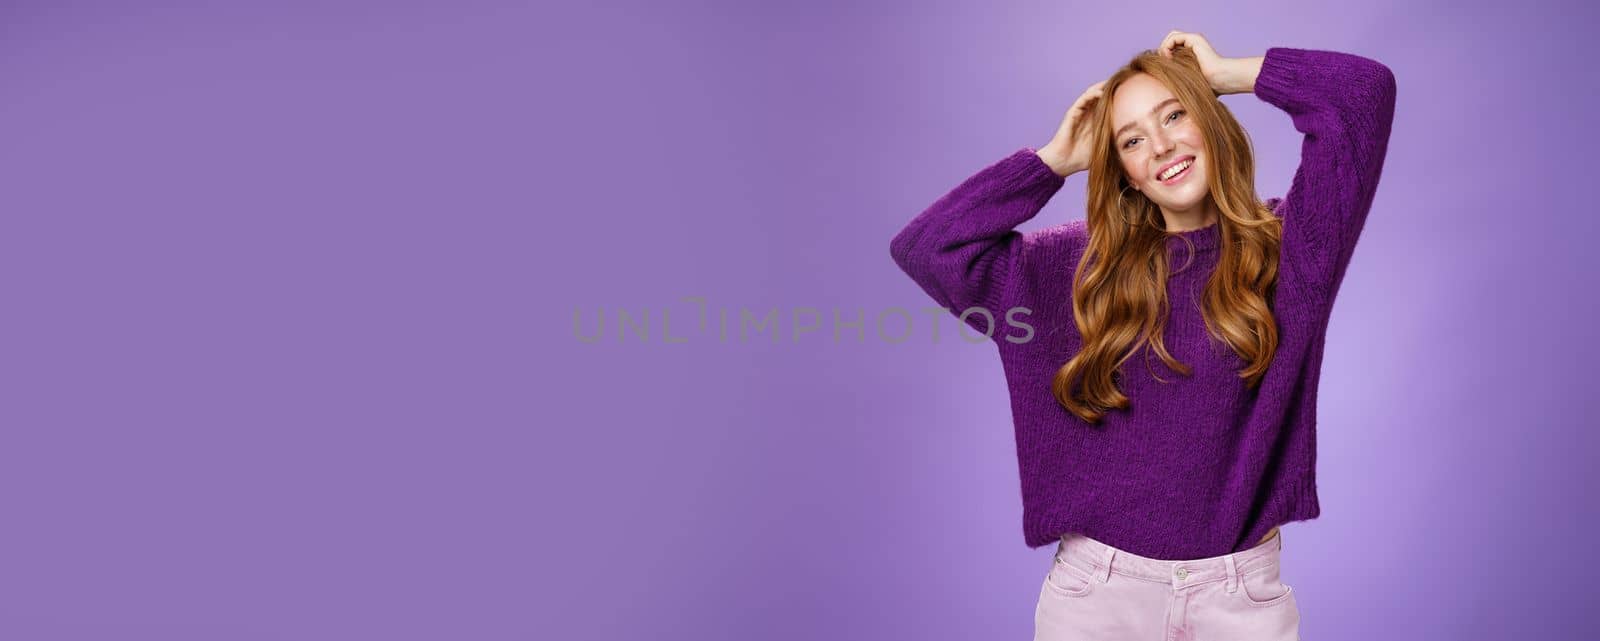 Carefree joyful and cool stylish redhead female student in purple warm sweater enjoying holidays stretching, holding hands near head, tilting and smiling happily relaxing against violet background.